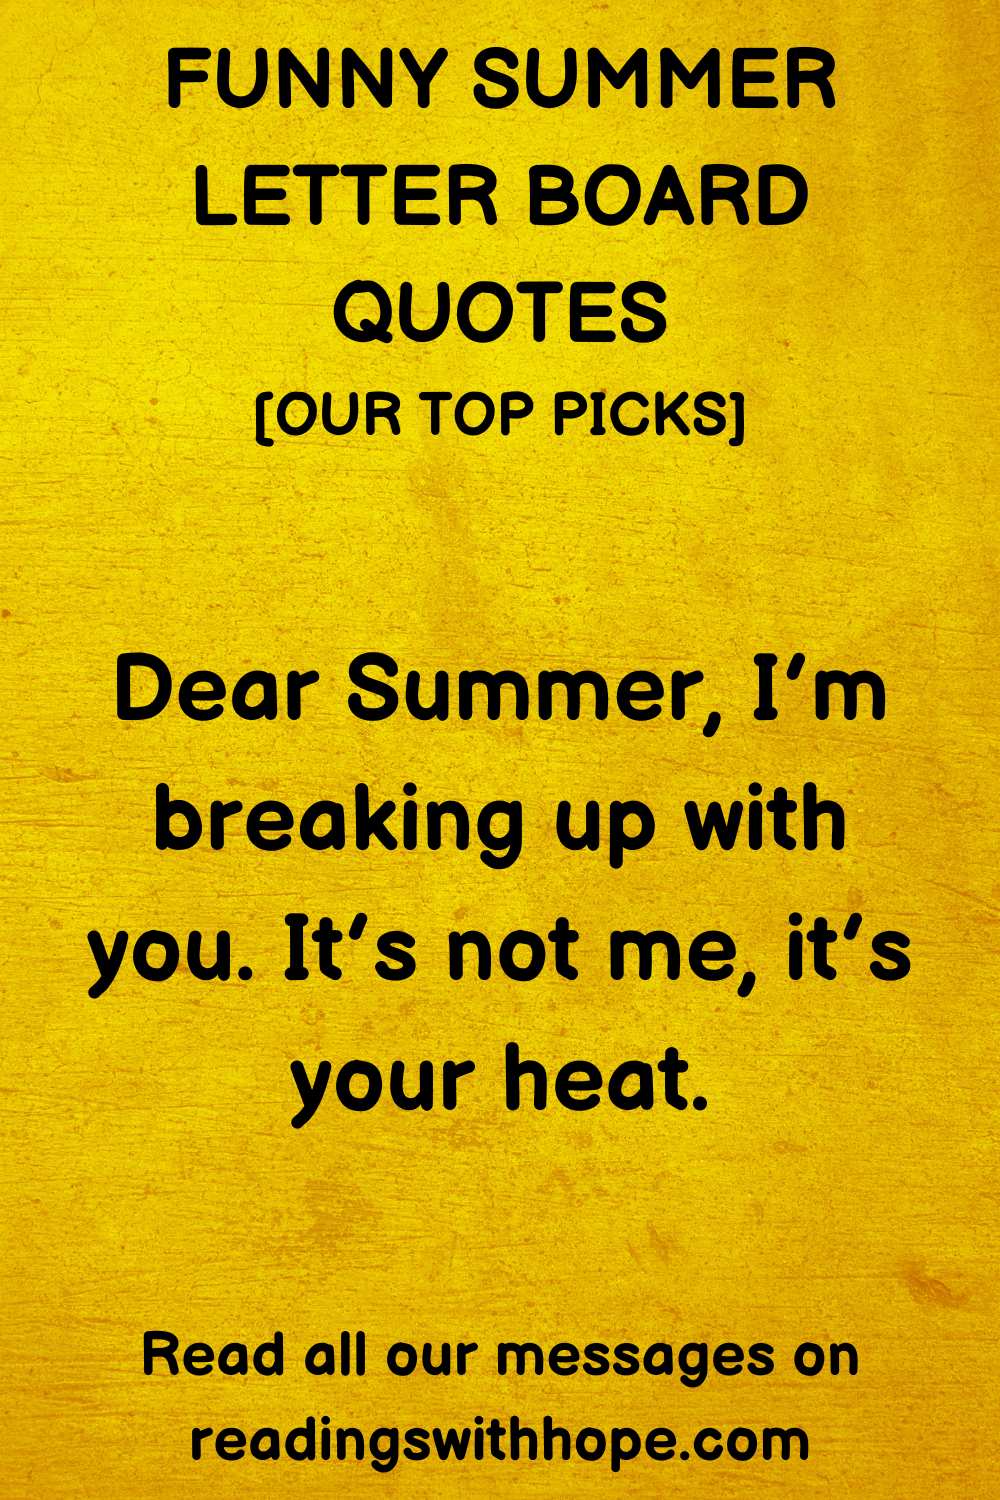 Funny Summer Letter Board Quotes